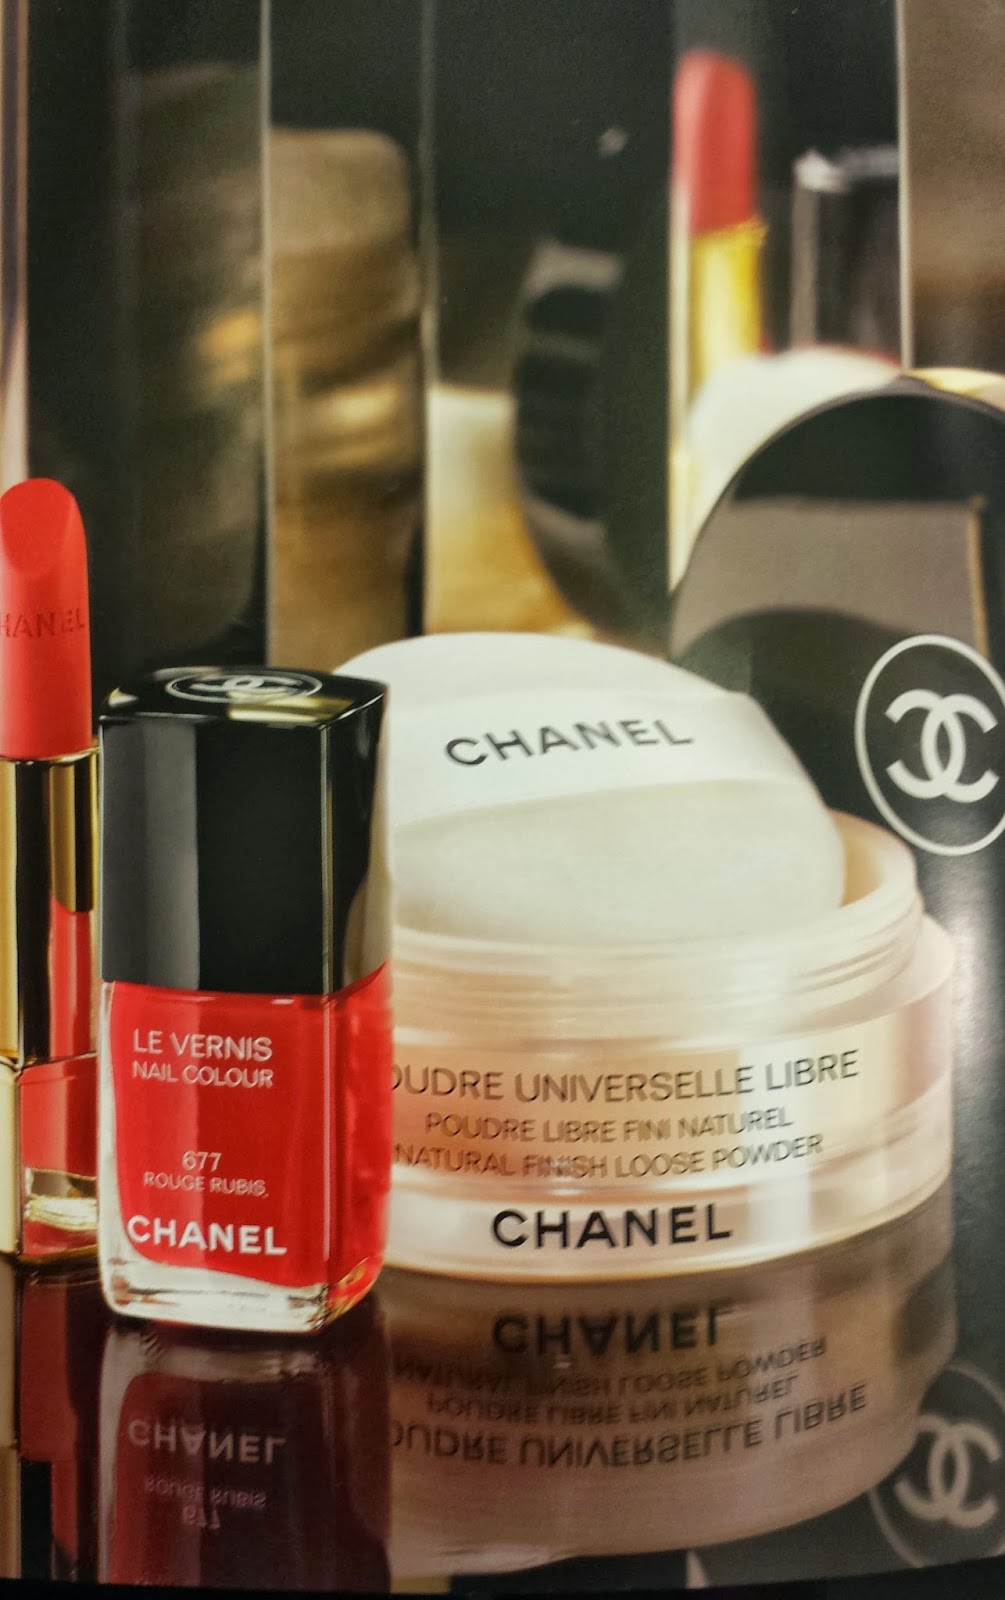 Jayded Dreaming Beauty Blog : CHANEL: HOLIDAY 2013 COLLECTION NUIT INFINIE  DE CHANEL